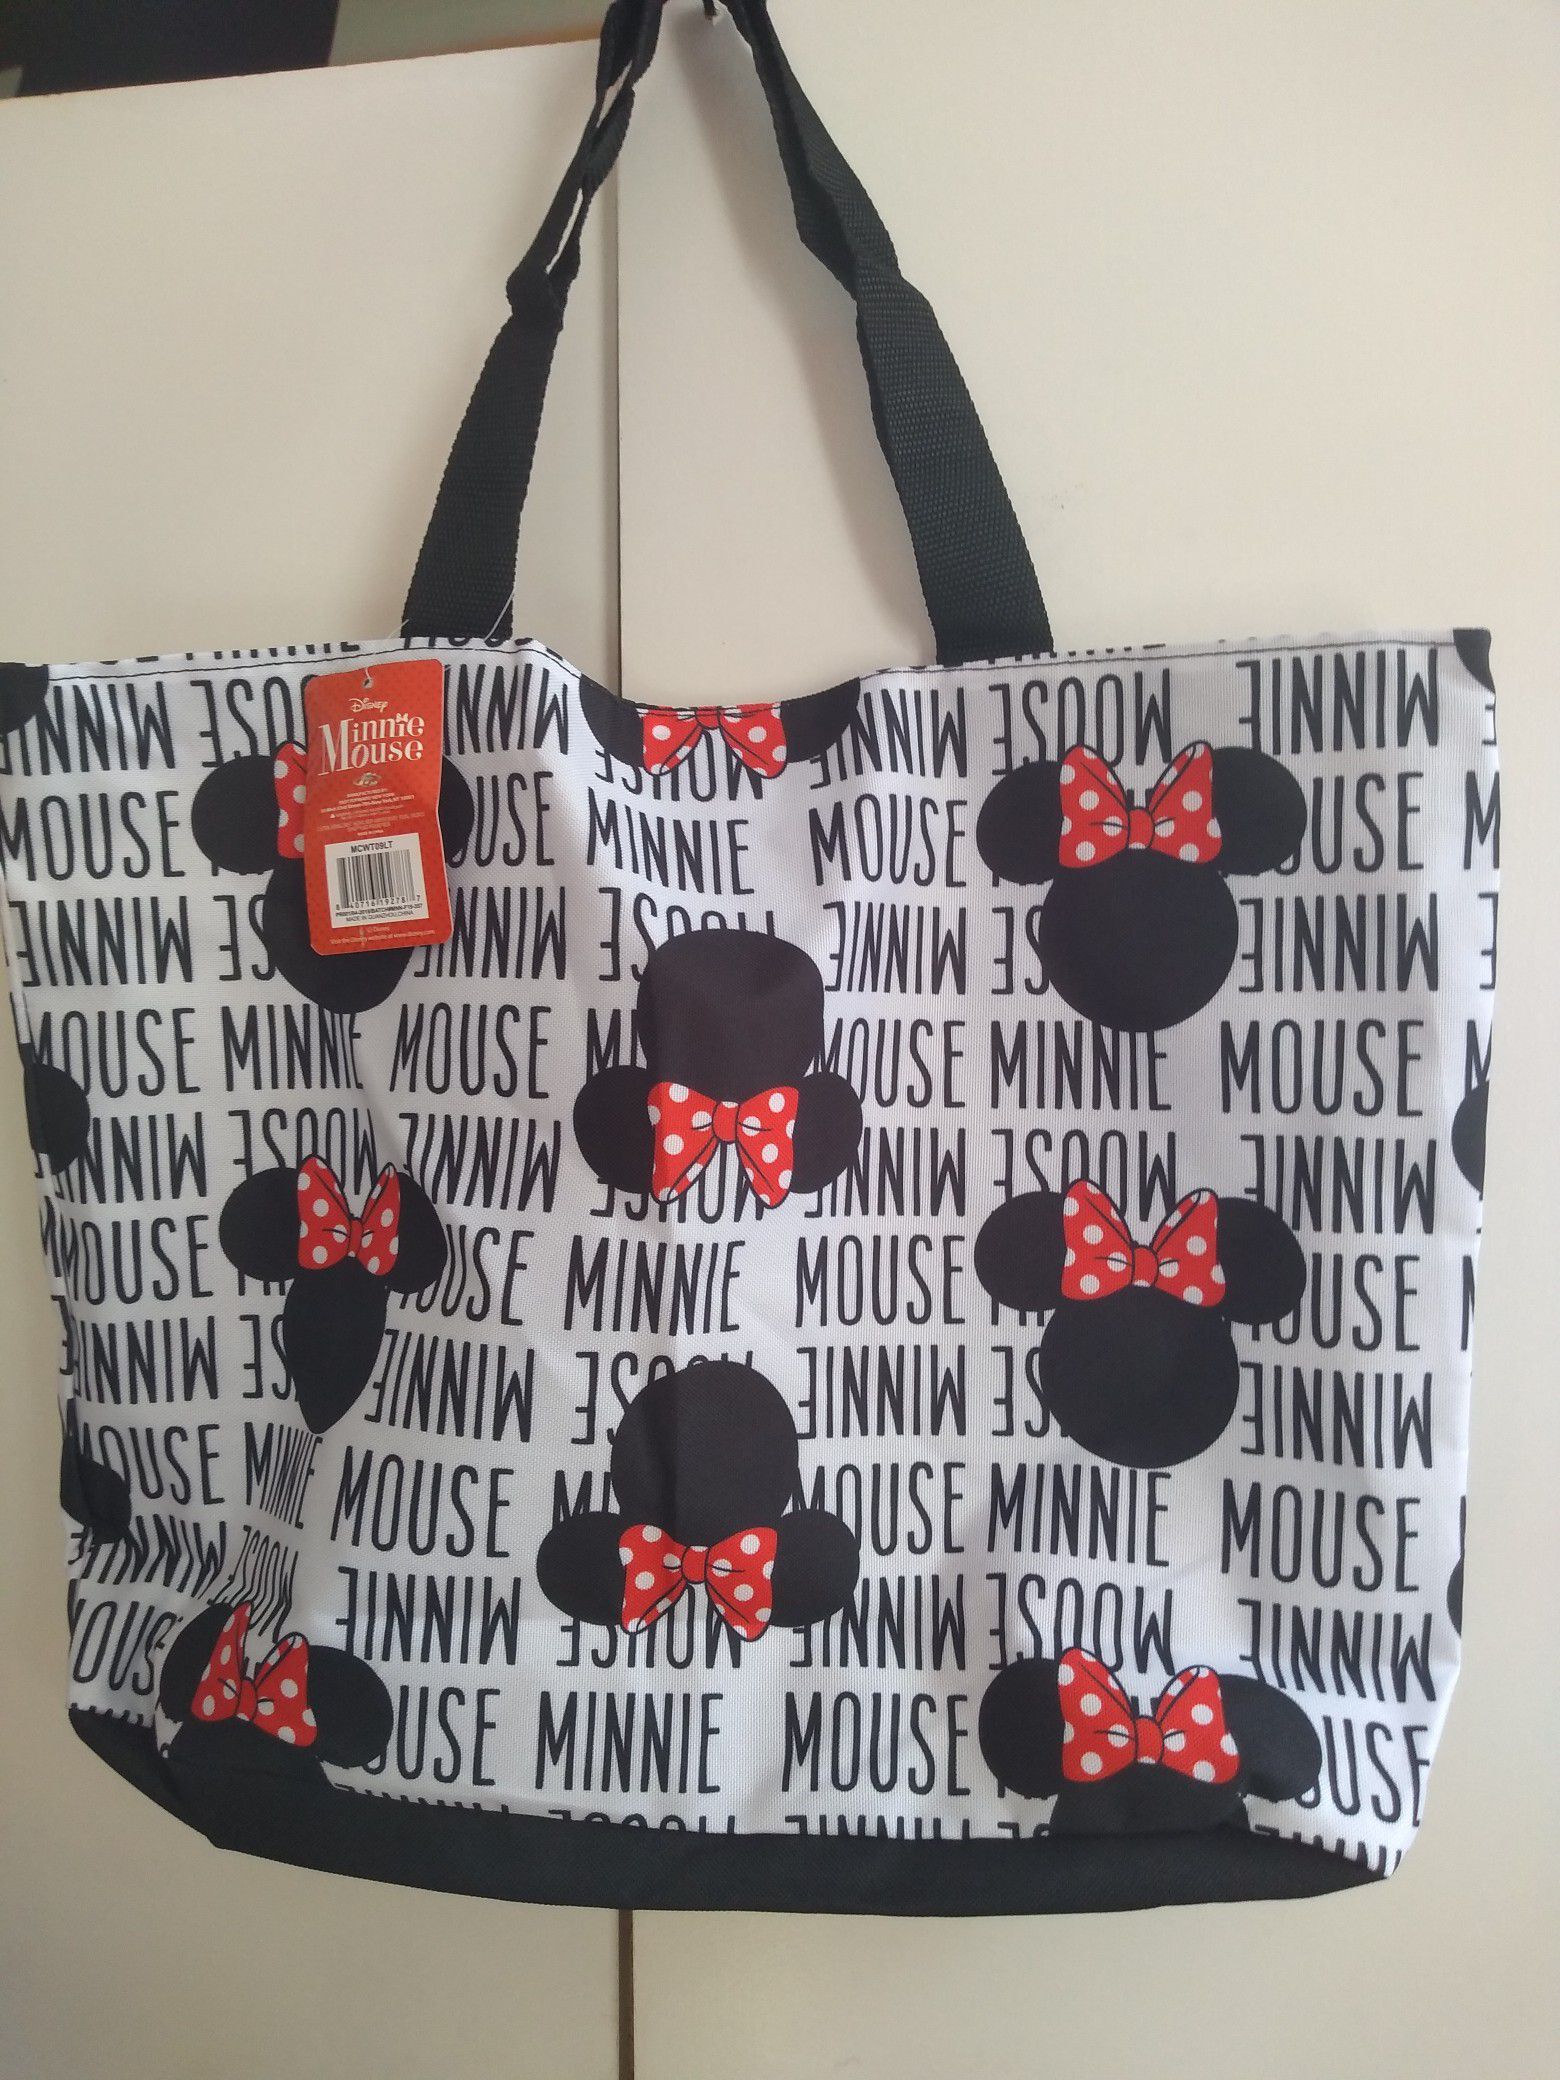 Disney's Minnie Mouse Tote Bag.